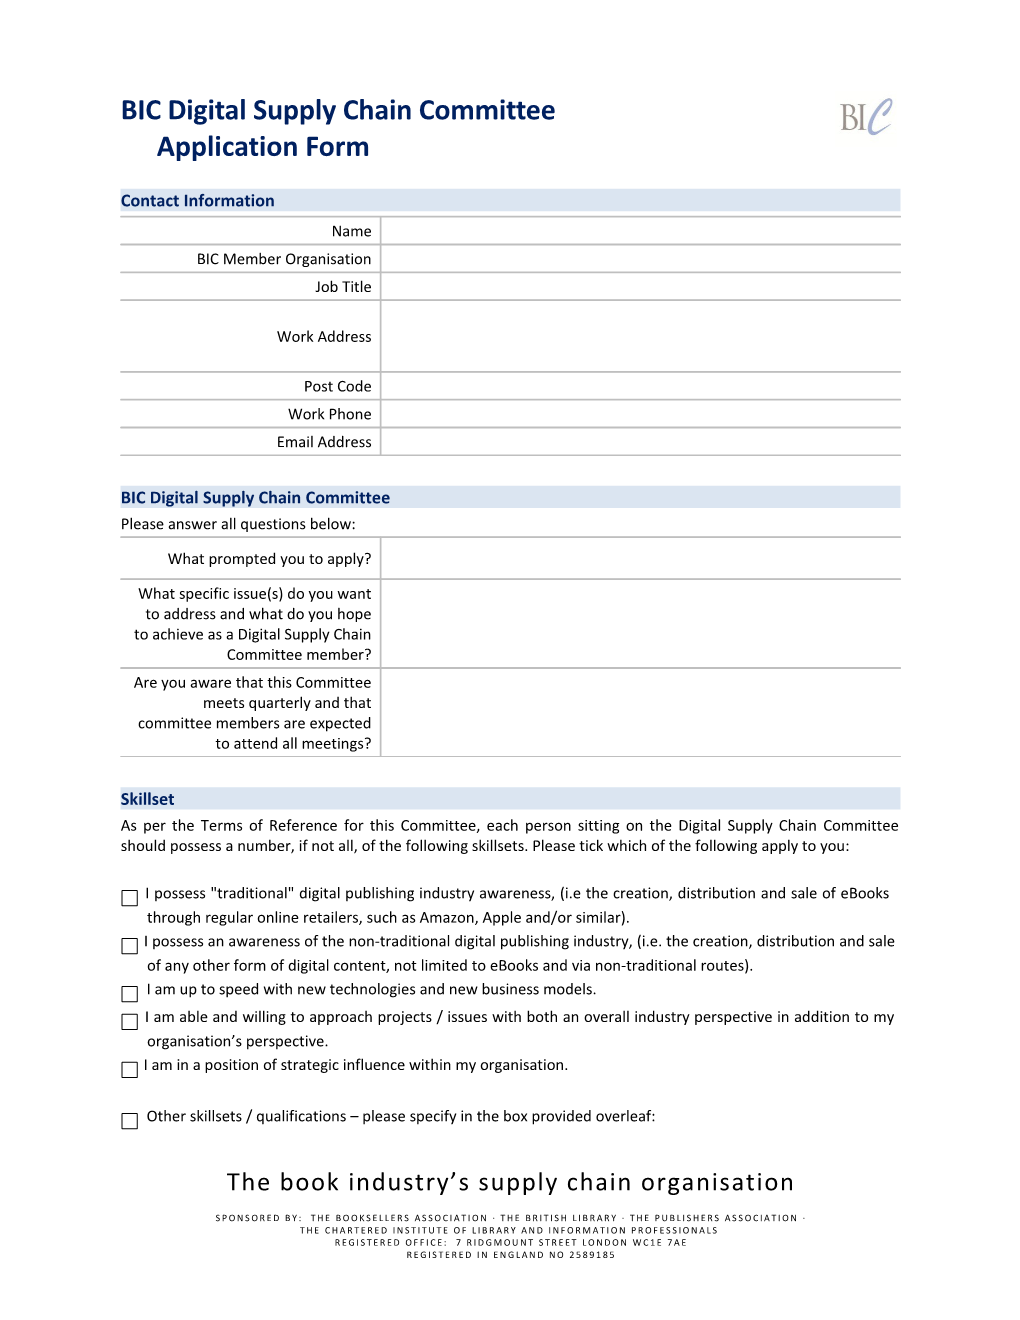 BIC Digital Supply Chain Committeeapplication Form